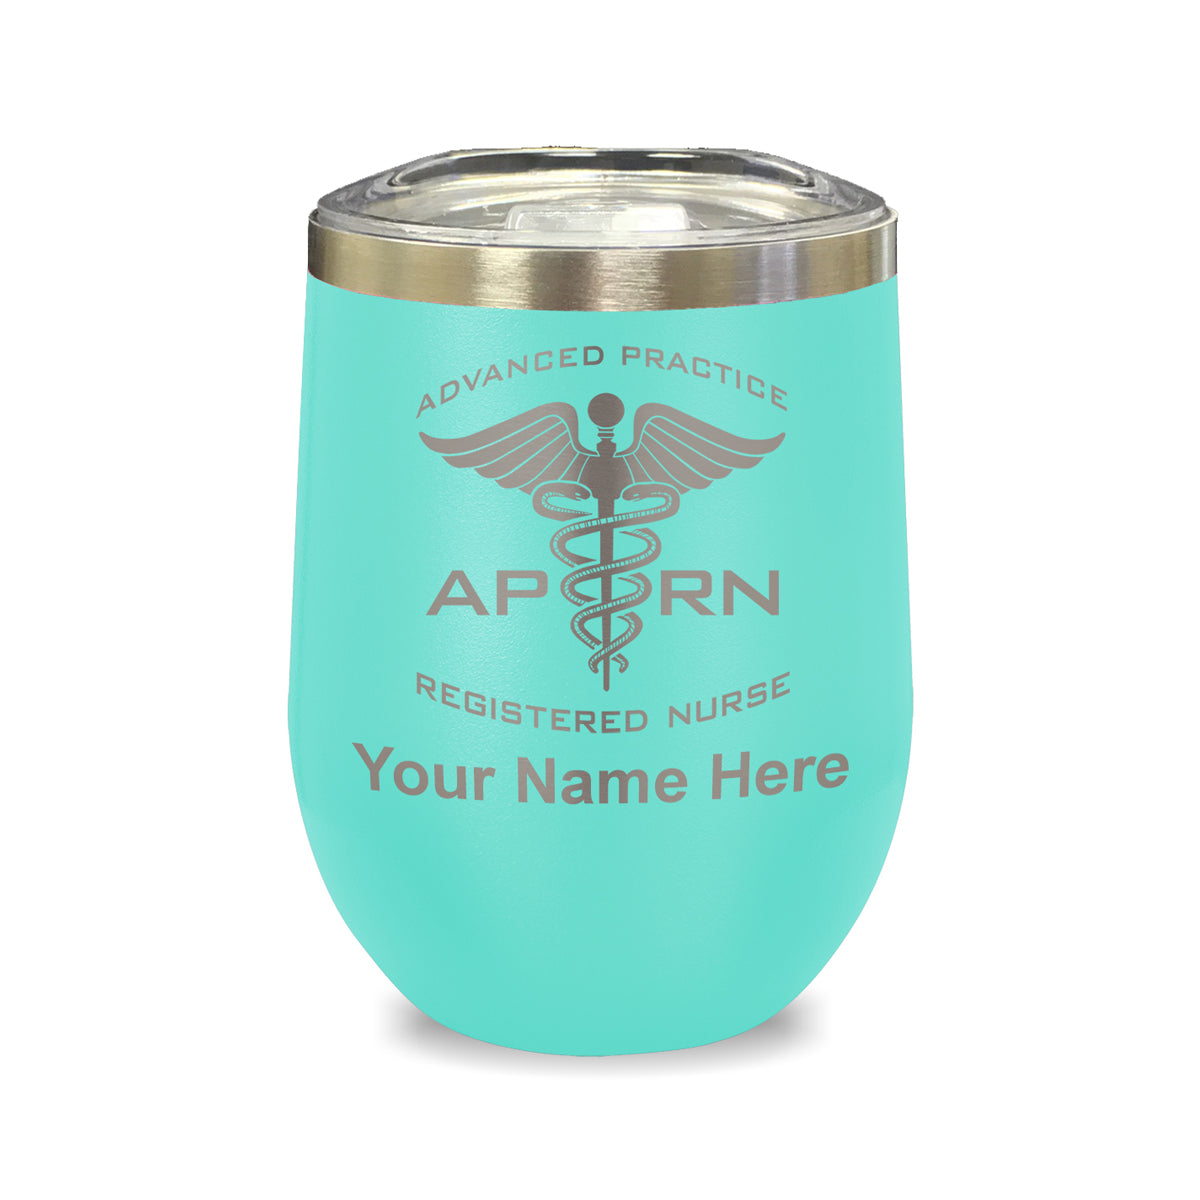 LaserGram Double Wall Stainless Steel Wine Glass, APRN Advanced Practice Registered Nurse, Personalized Engraving Included